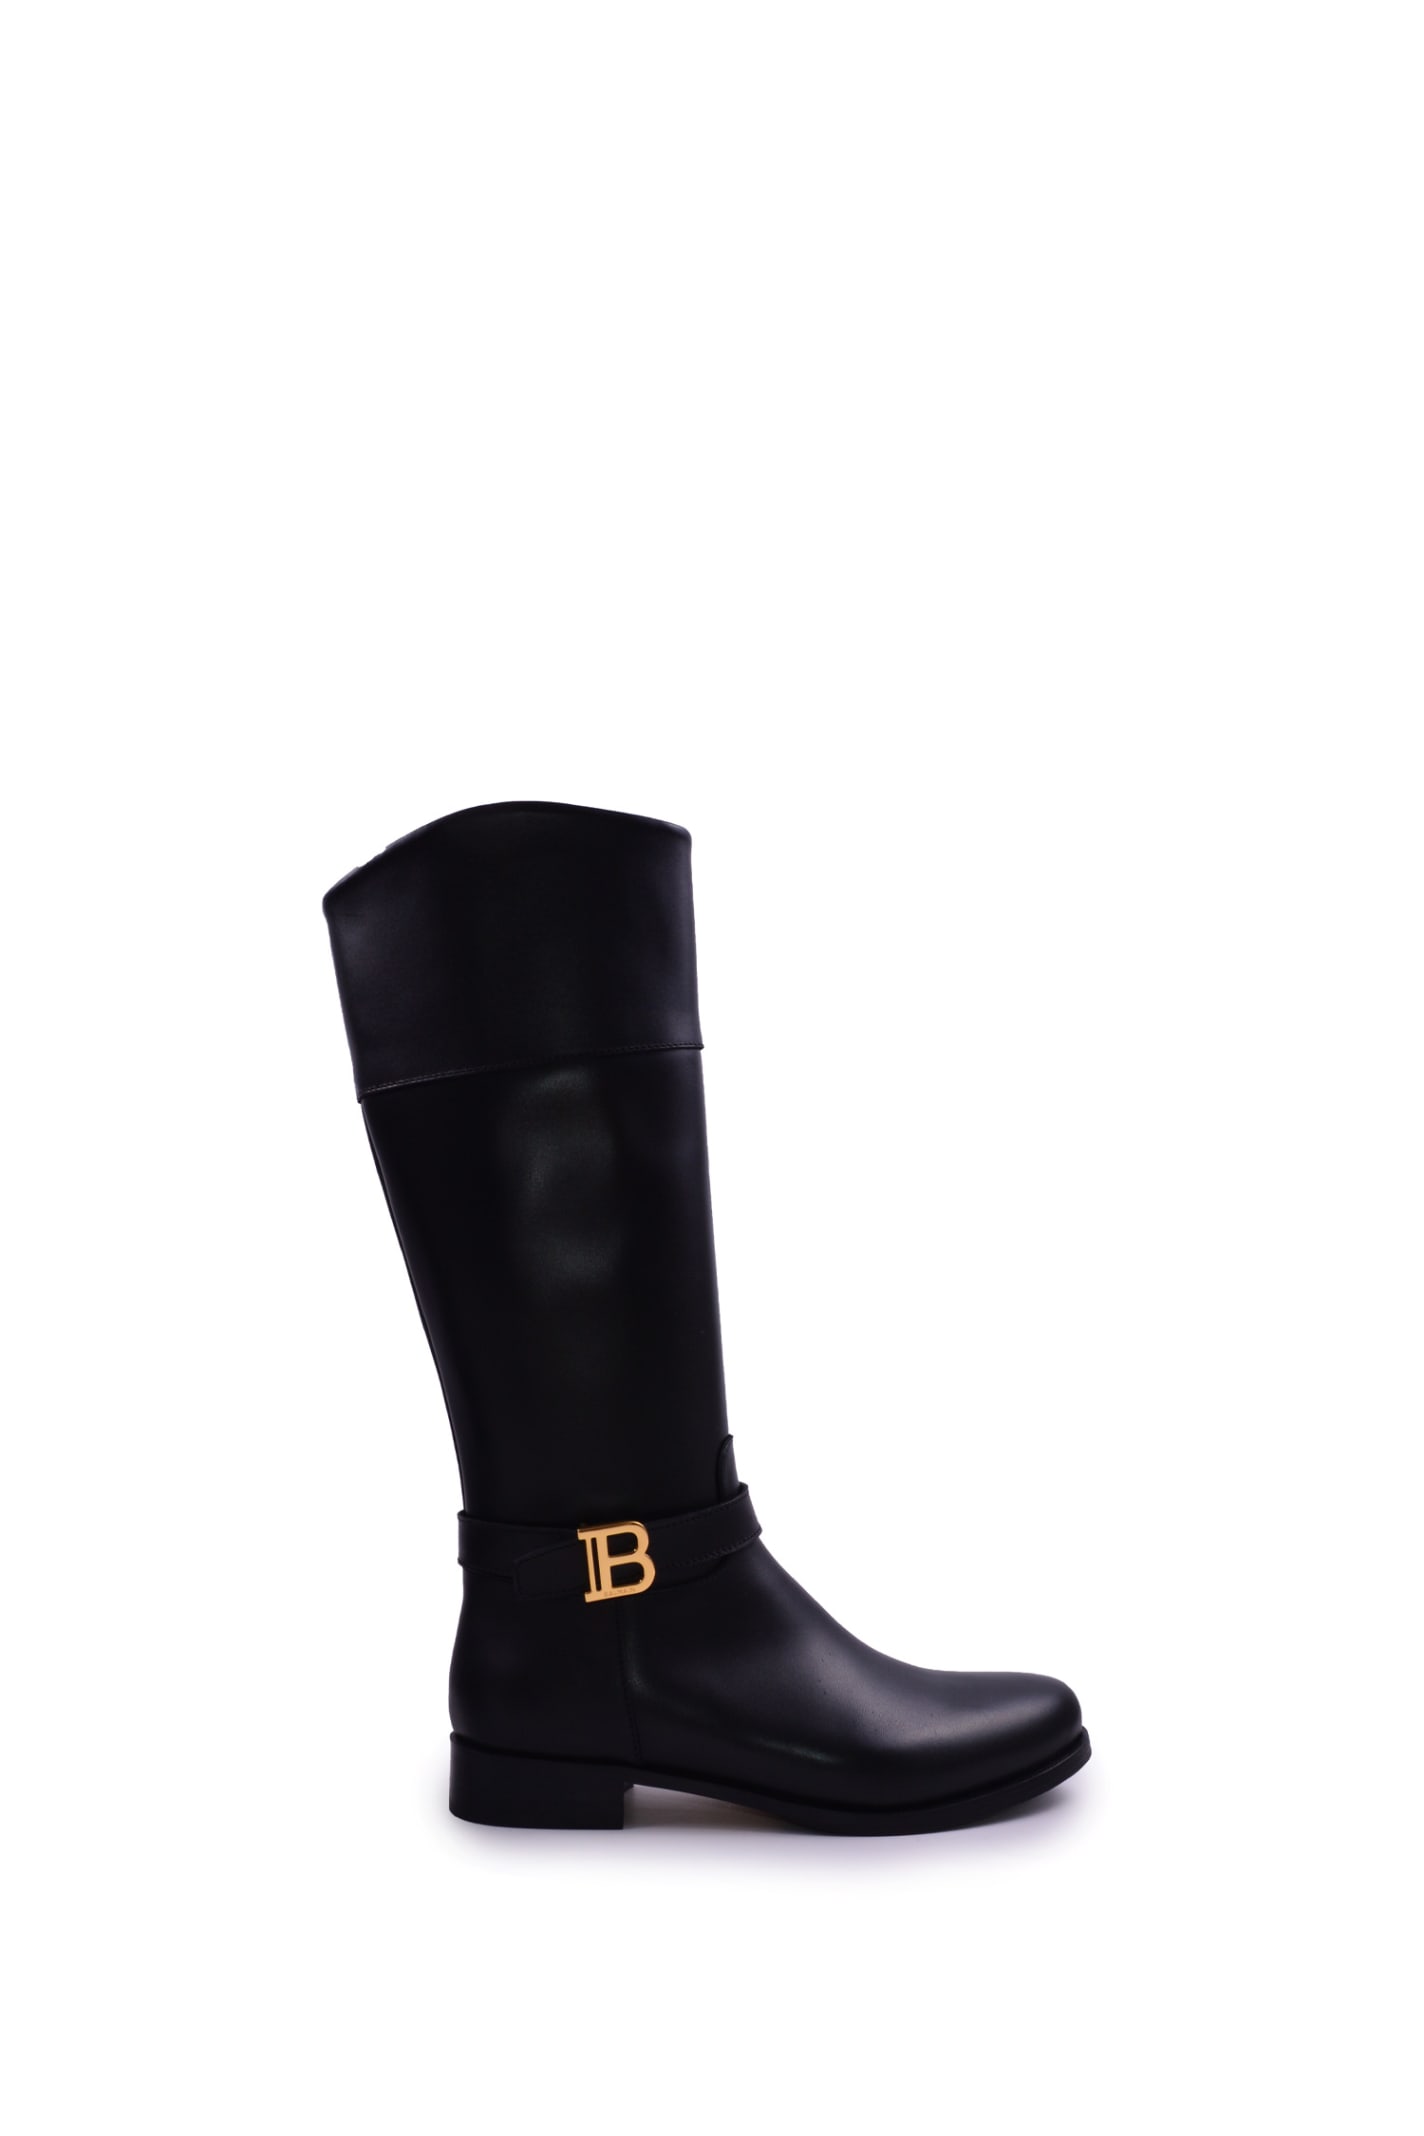 BALMAIN LEATHER BOOTS WITH LOGO BUCKLE